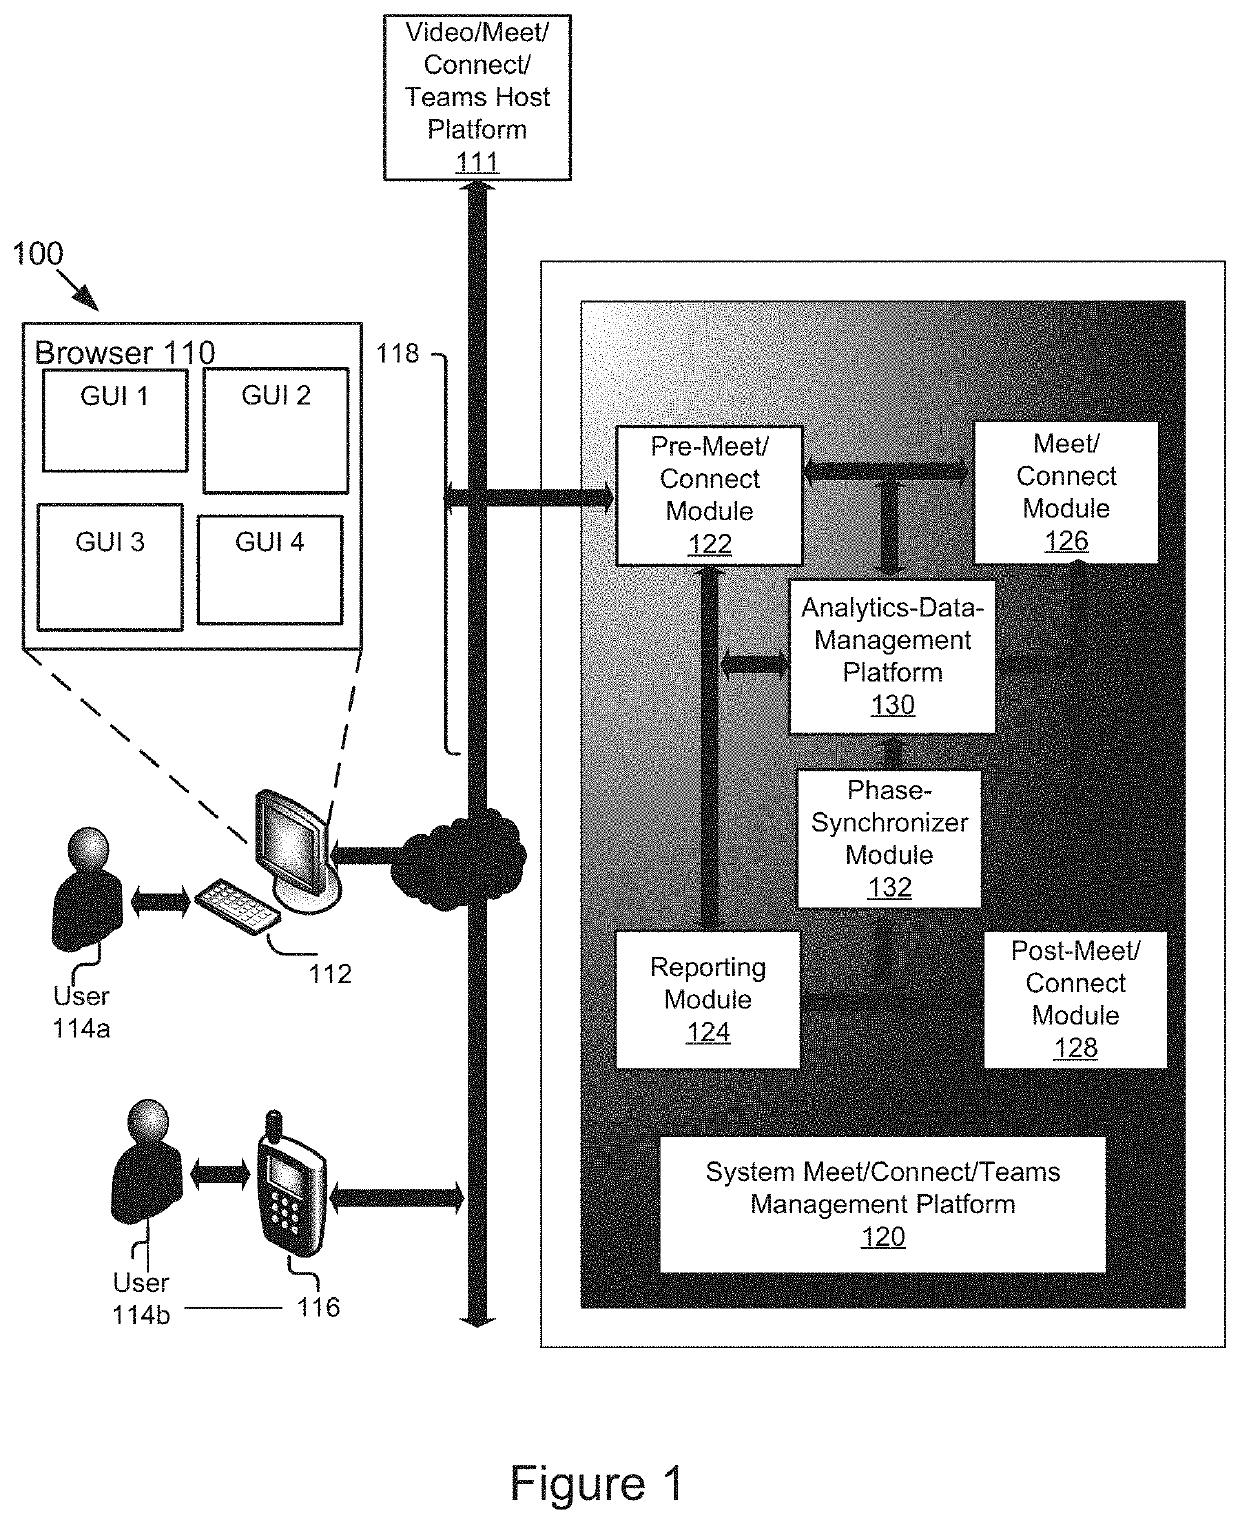 Real-Time Event and Participant Communication Systems